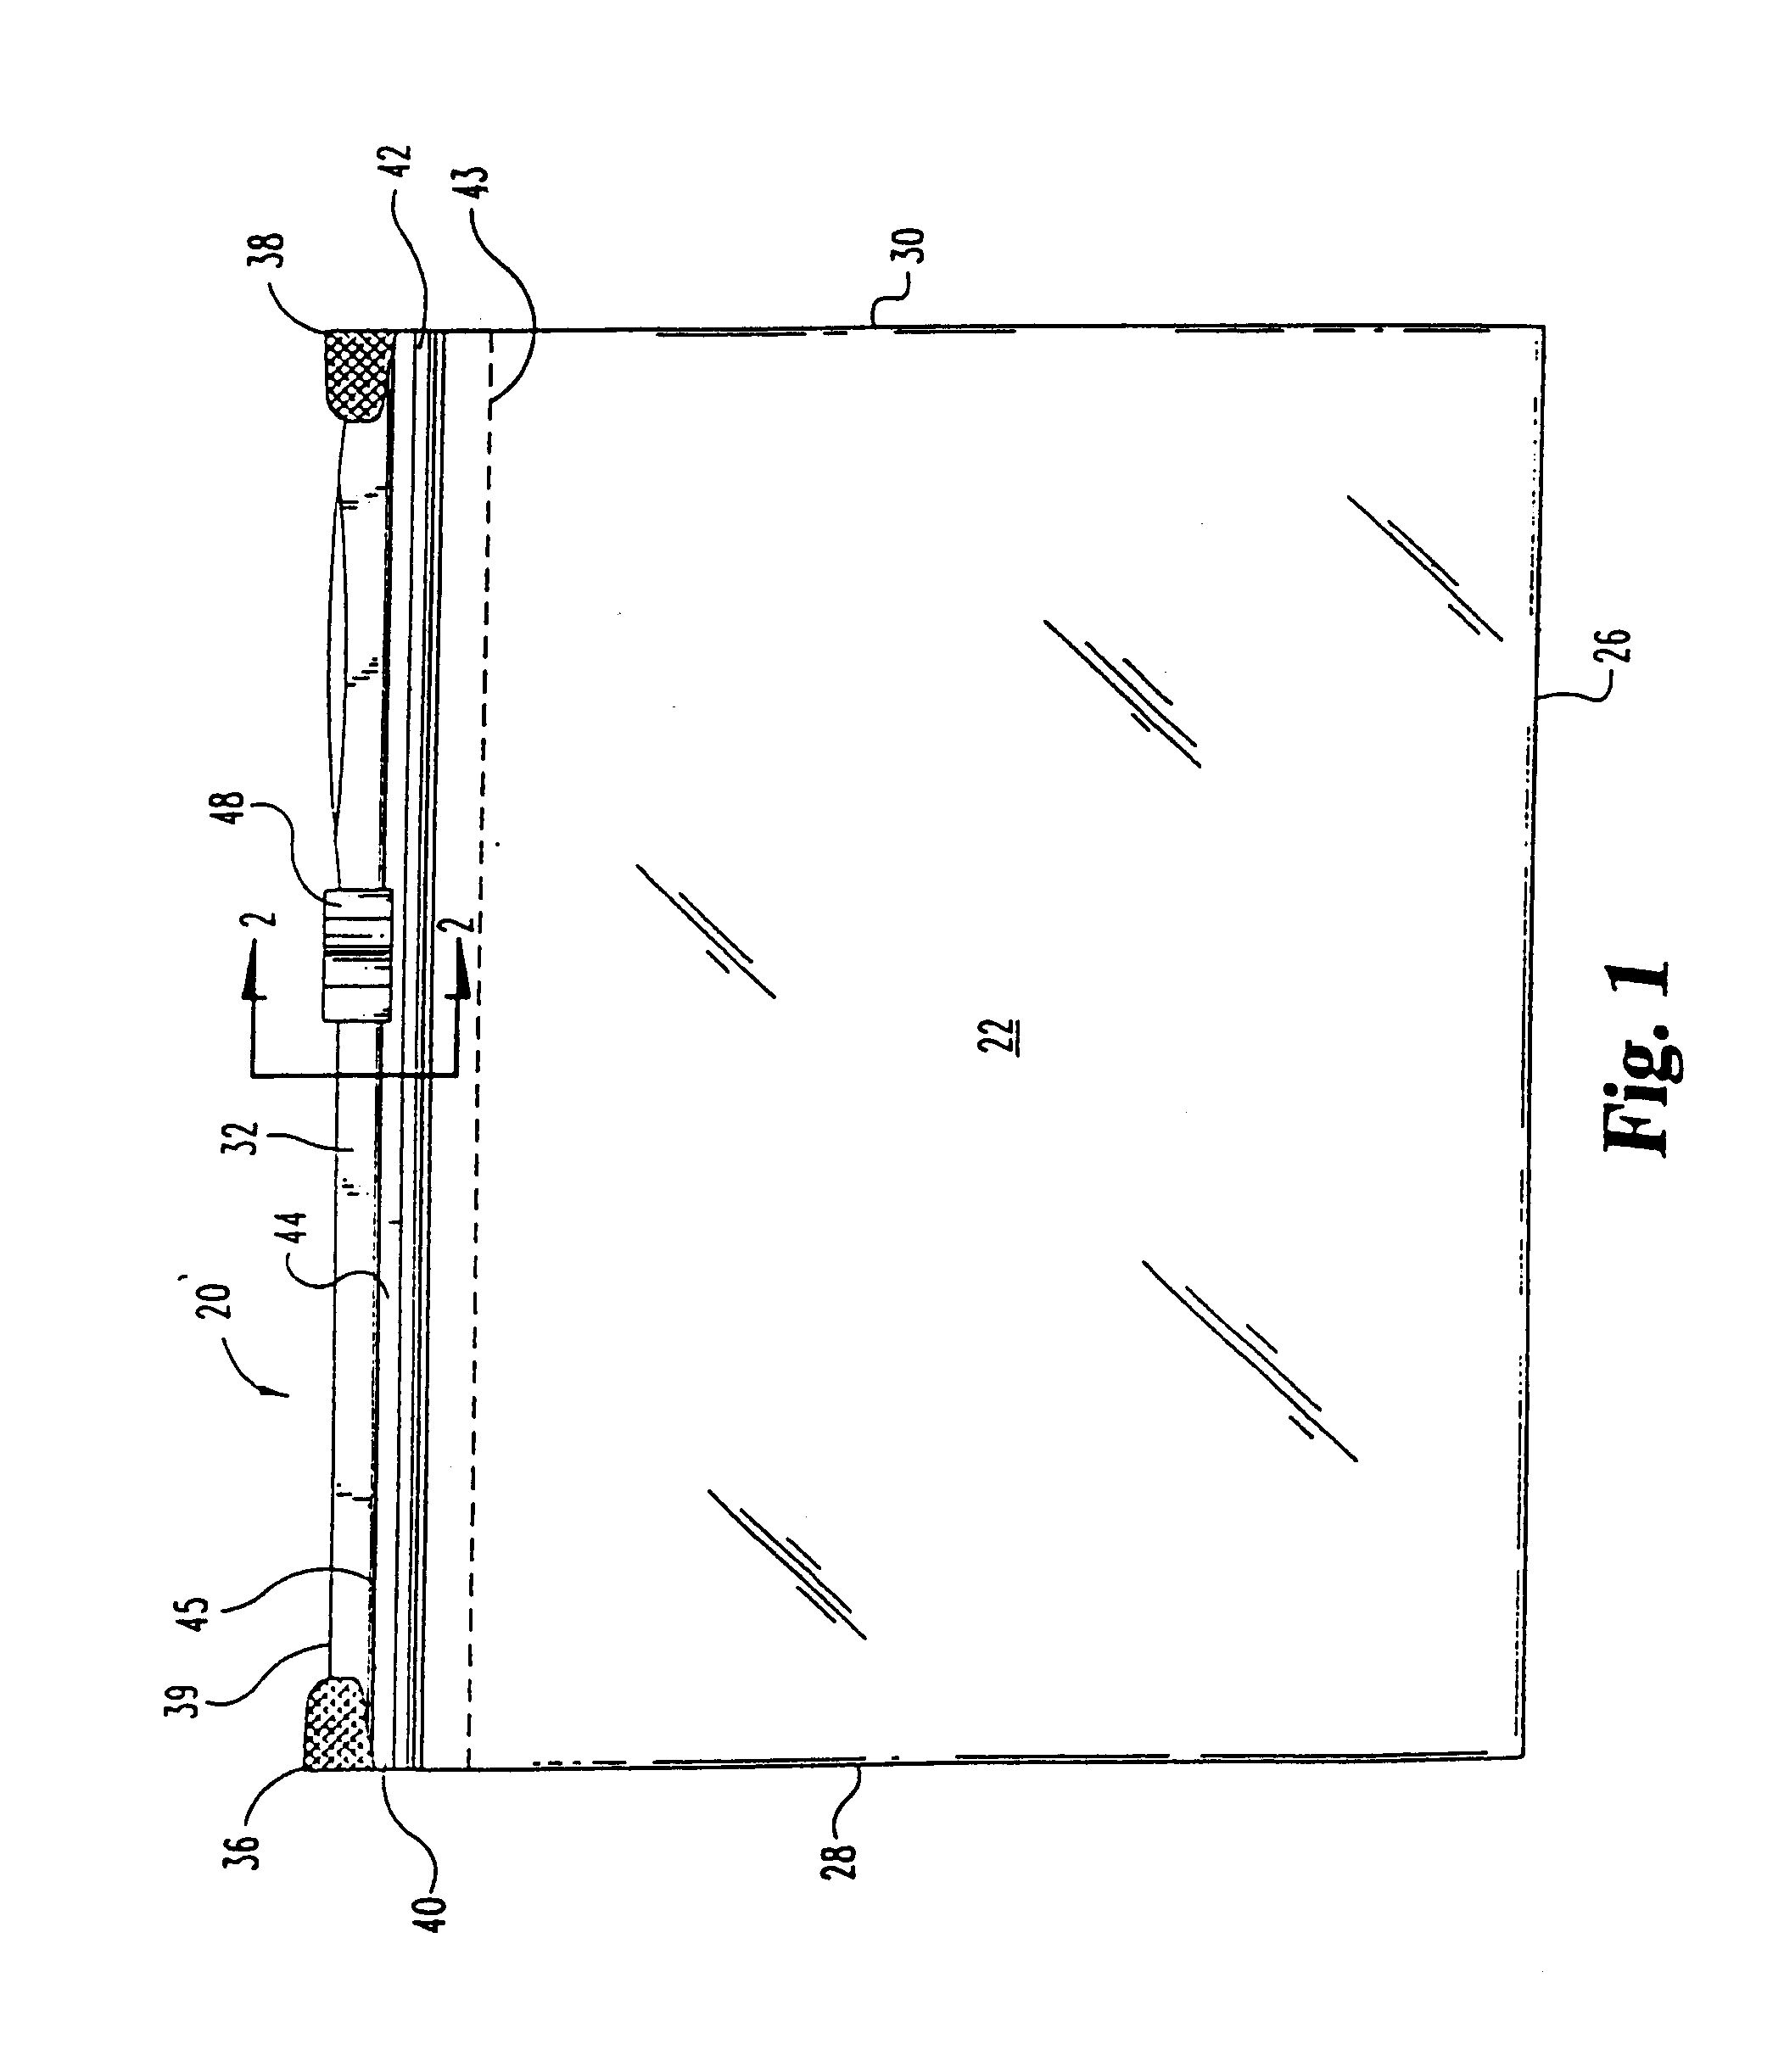 Method and apparatus for placing a product in a flexible recloseable container